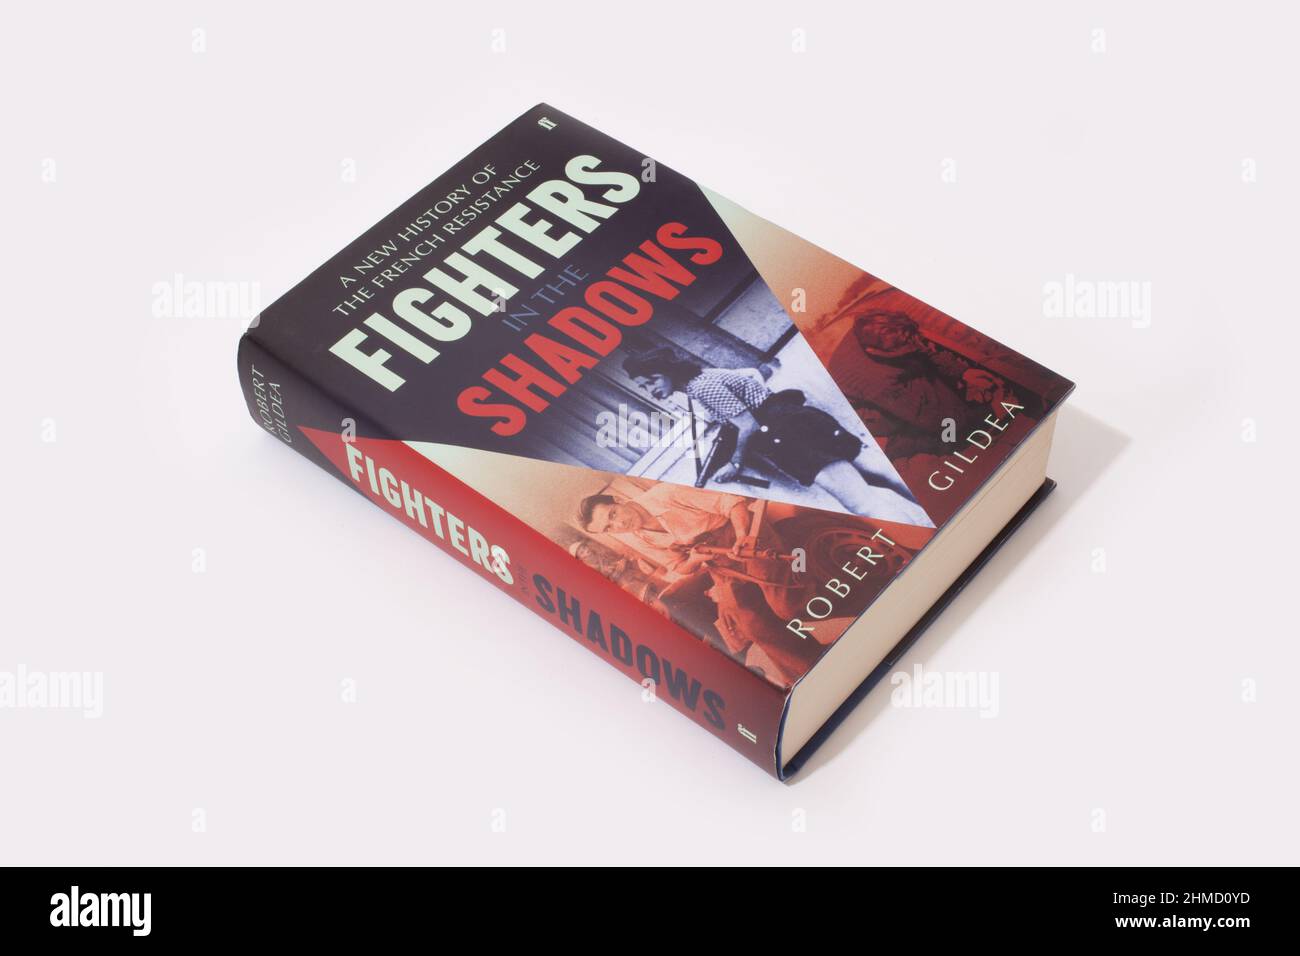 Il libro - A New History of the French Resistance Fighters in the Shadows di Robert Gildea Foto Stock